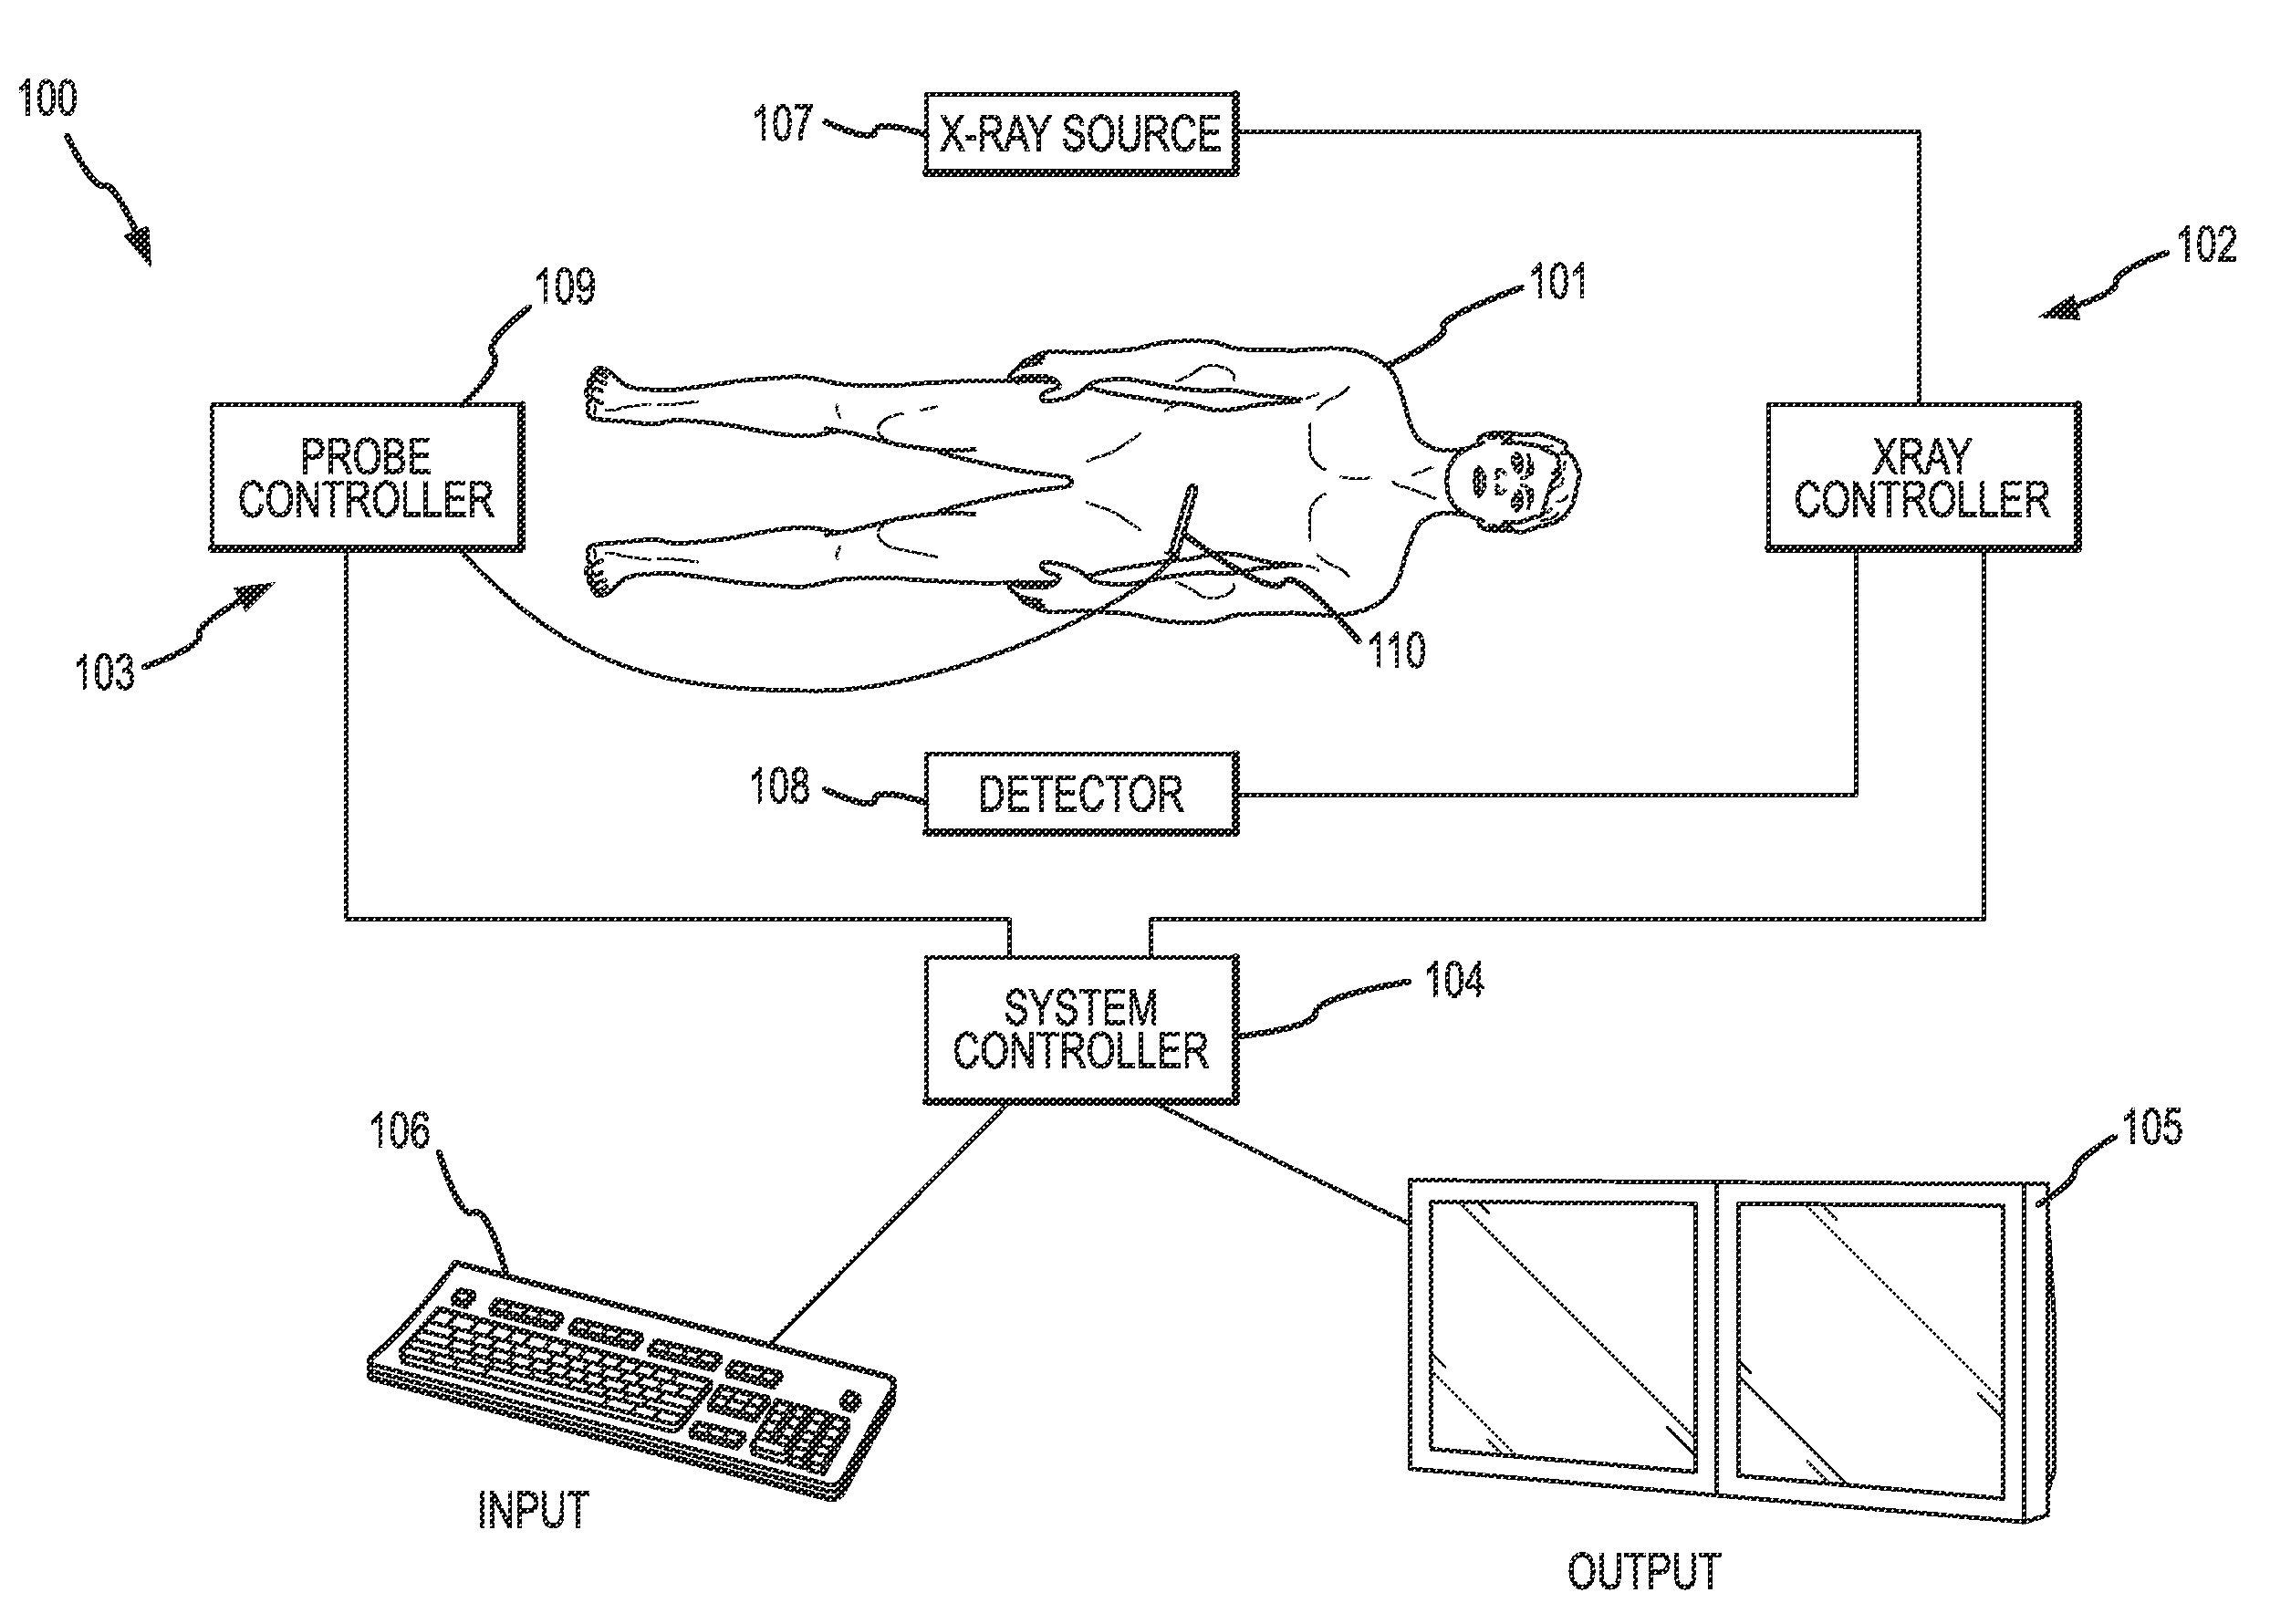 Methods and apparatuses for planning, performing, monitoring and assessing thermal ablation